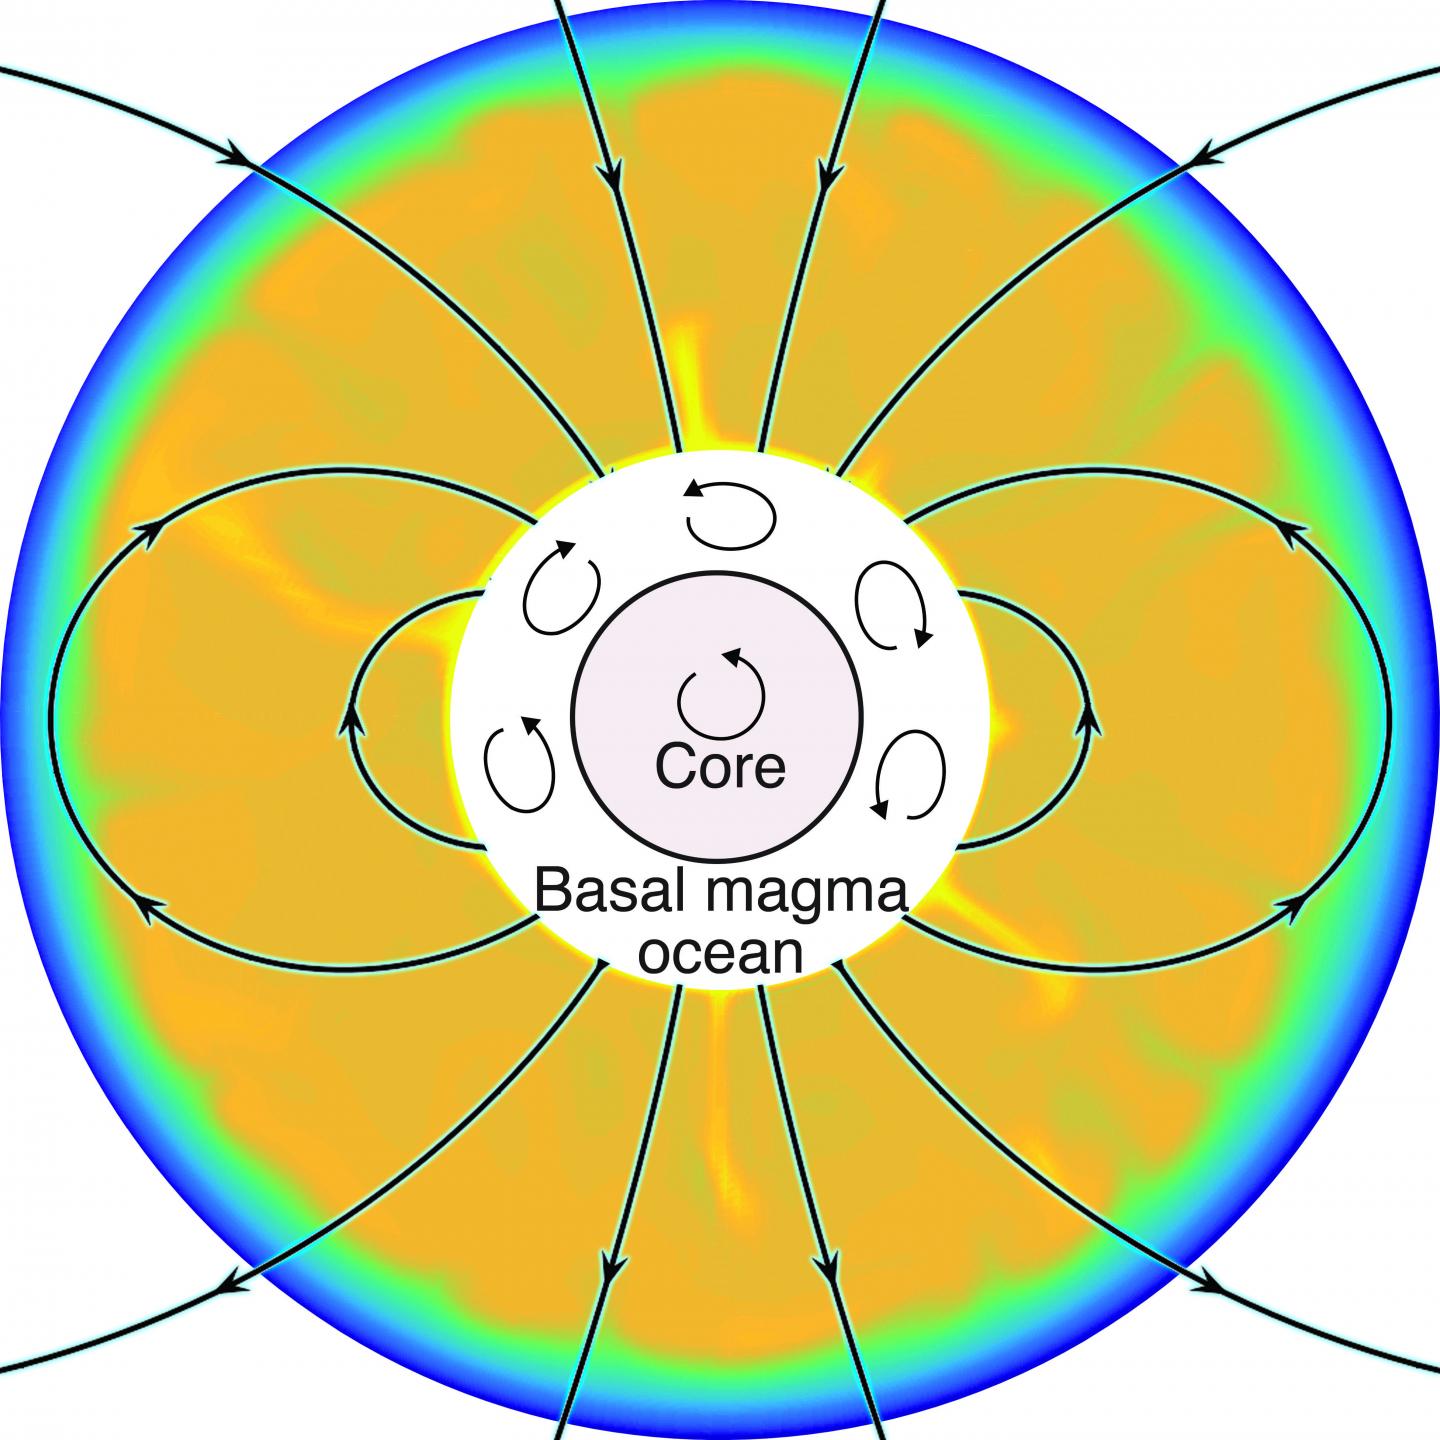 Model with Magnetic Field